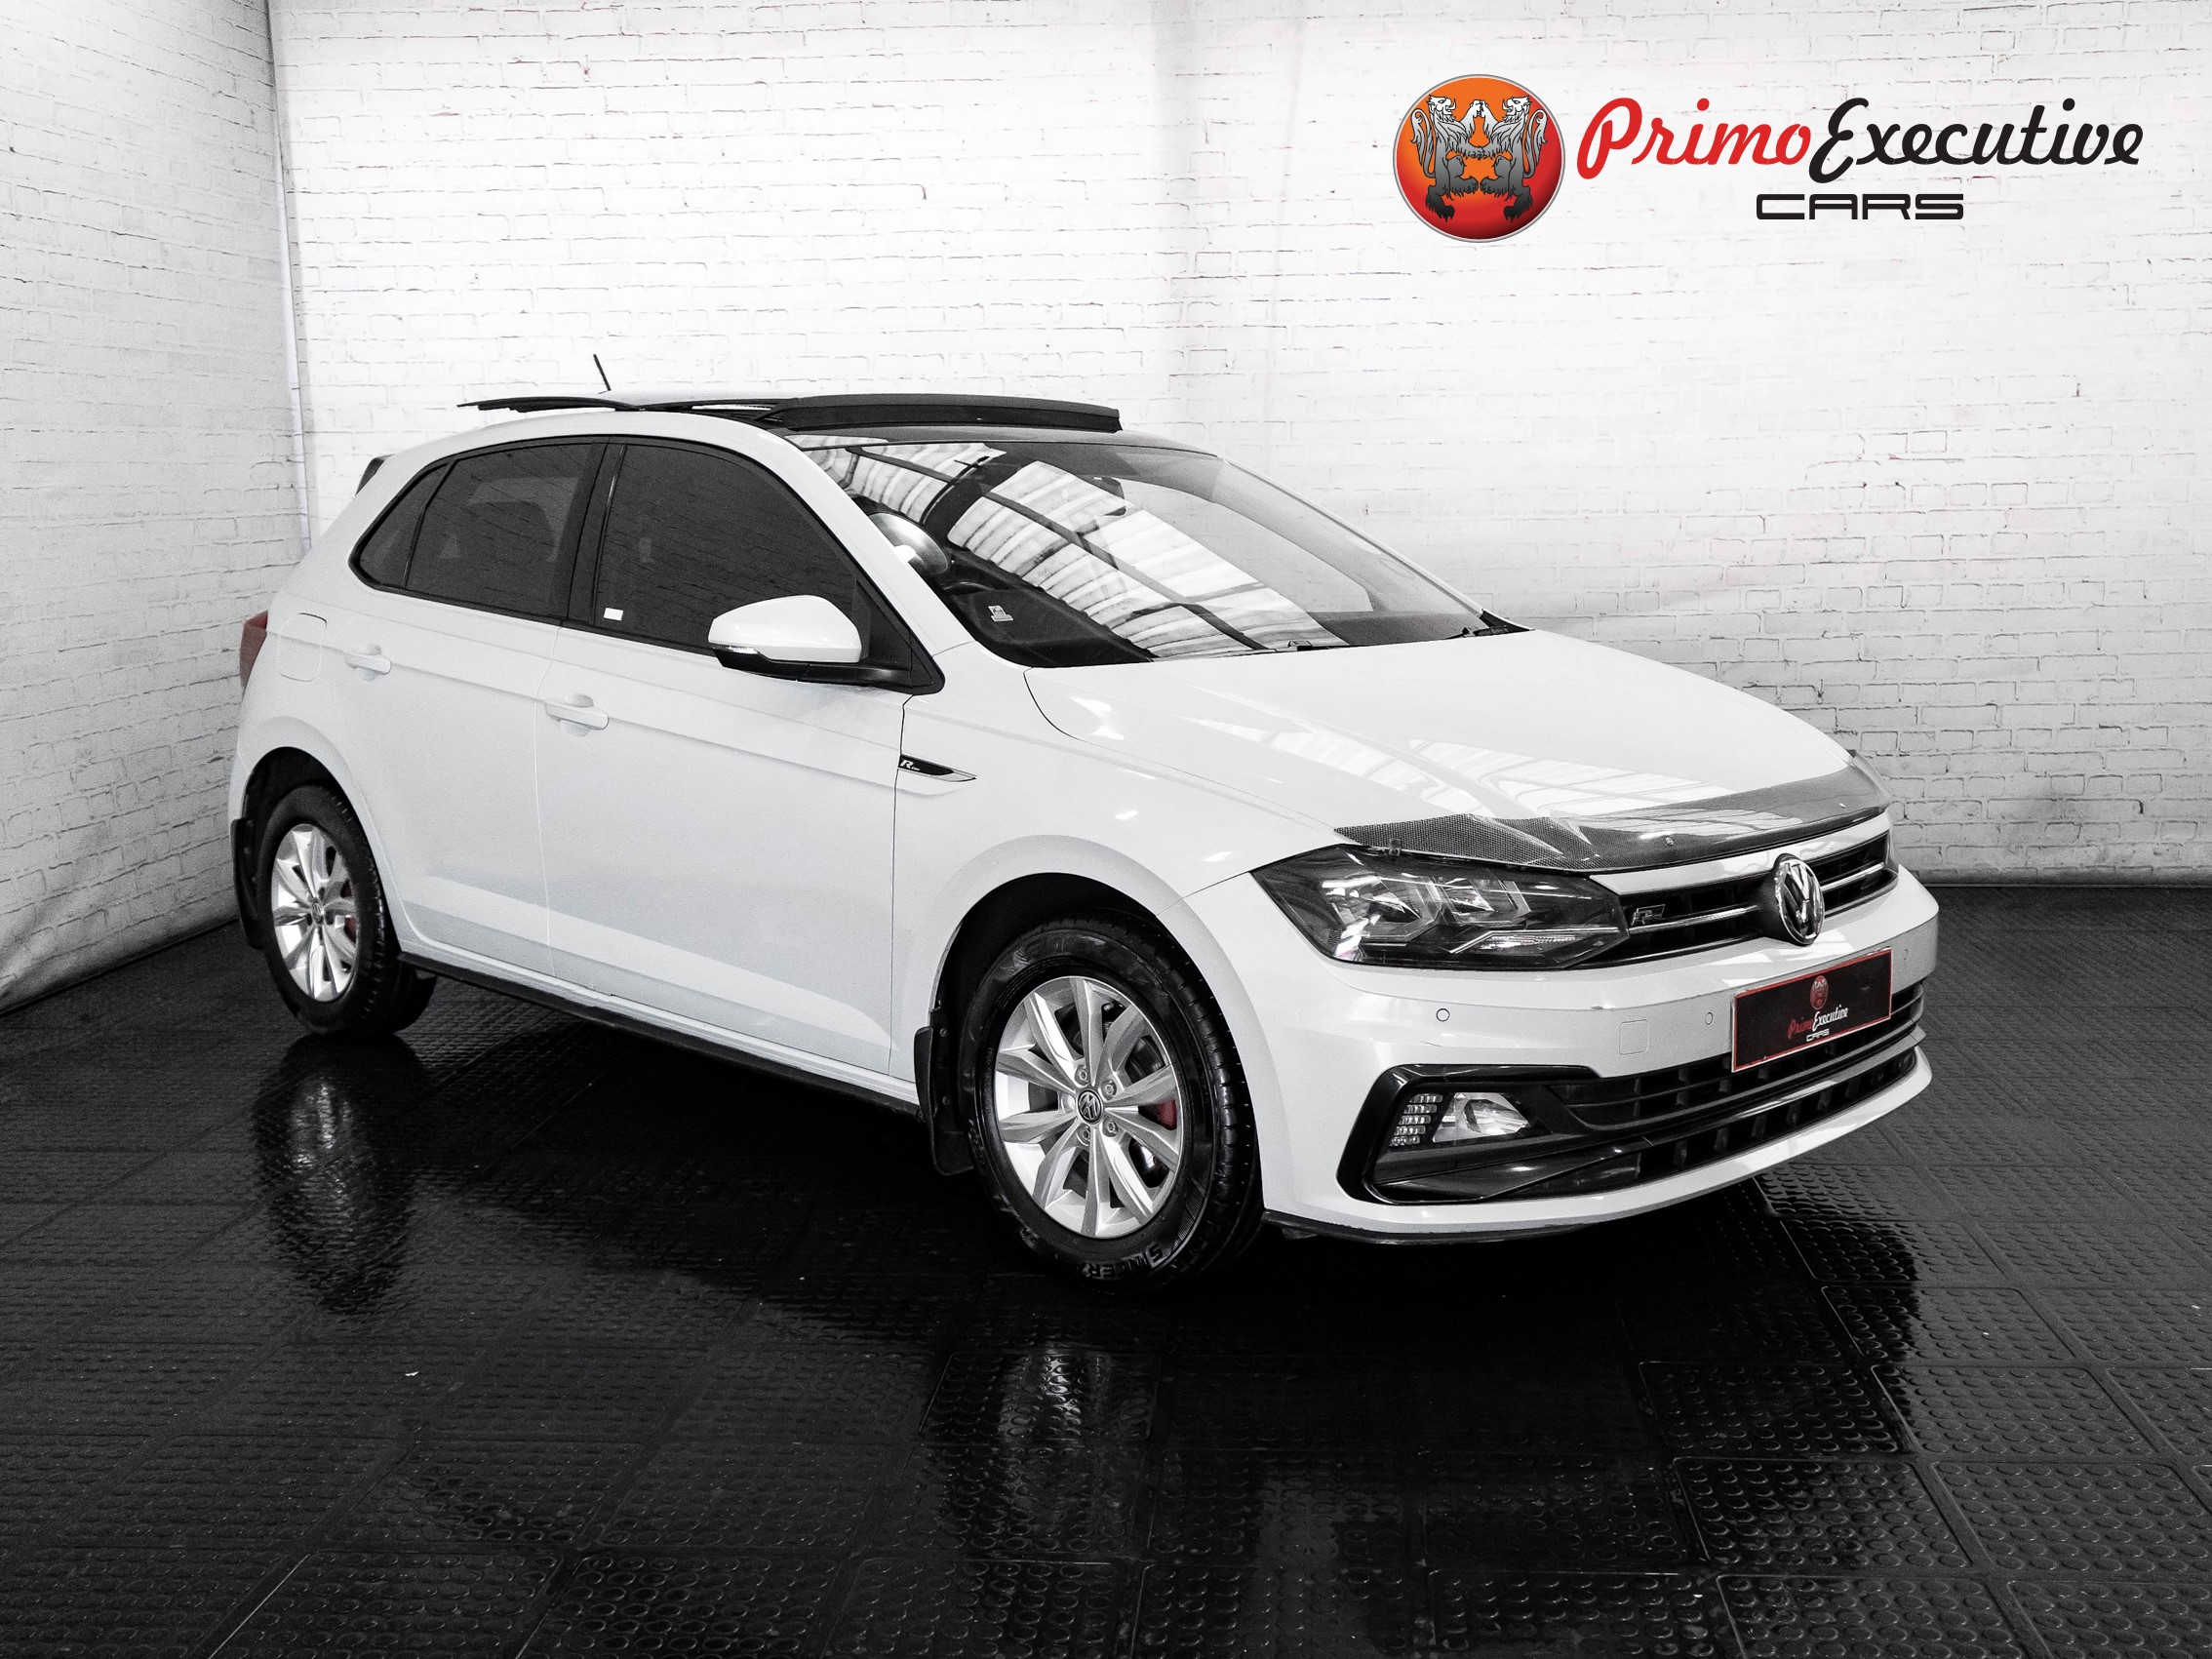 2019 Volkswagen Polo Hatch  for sale - 510497